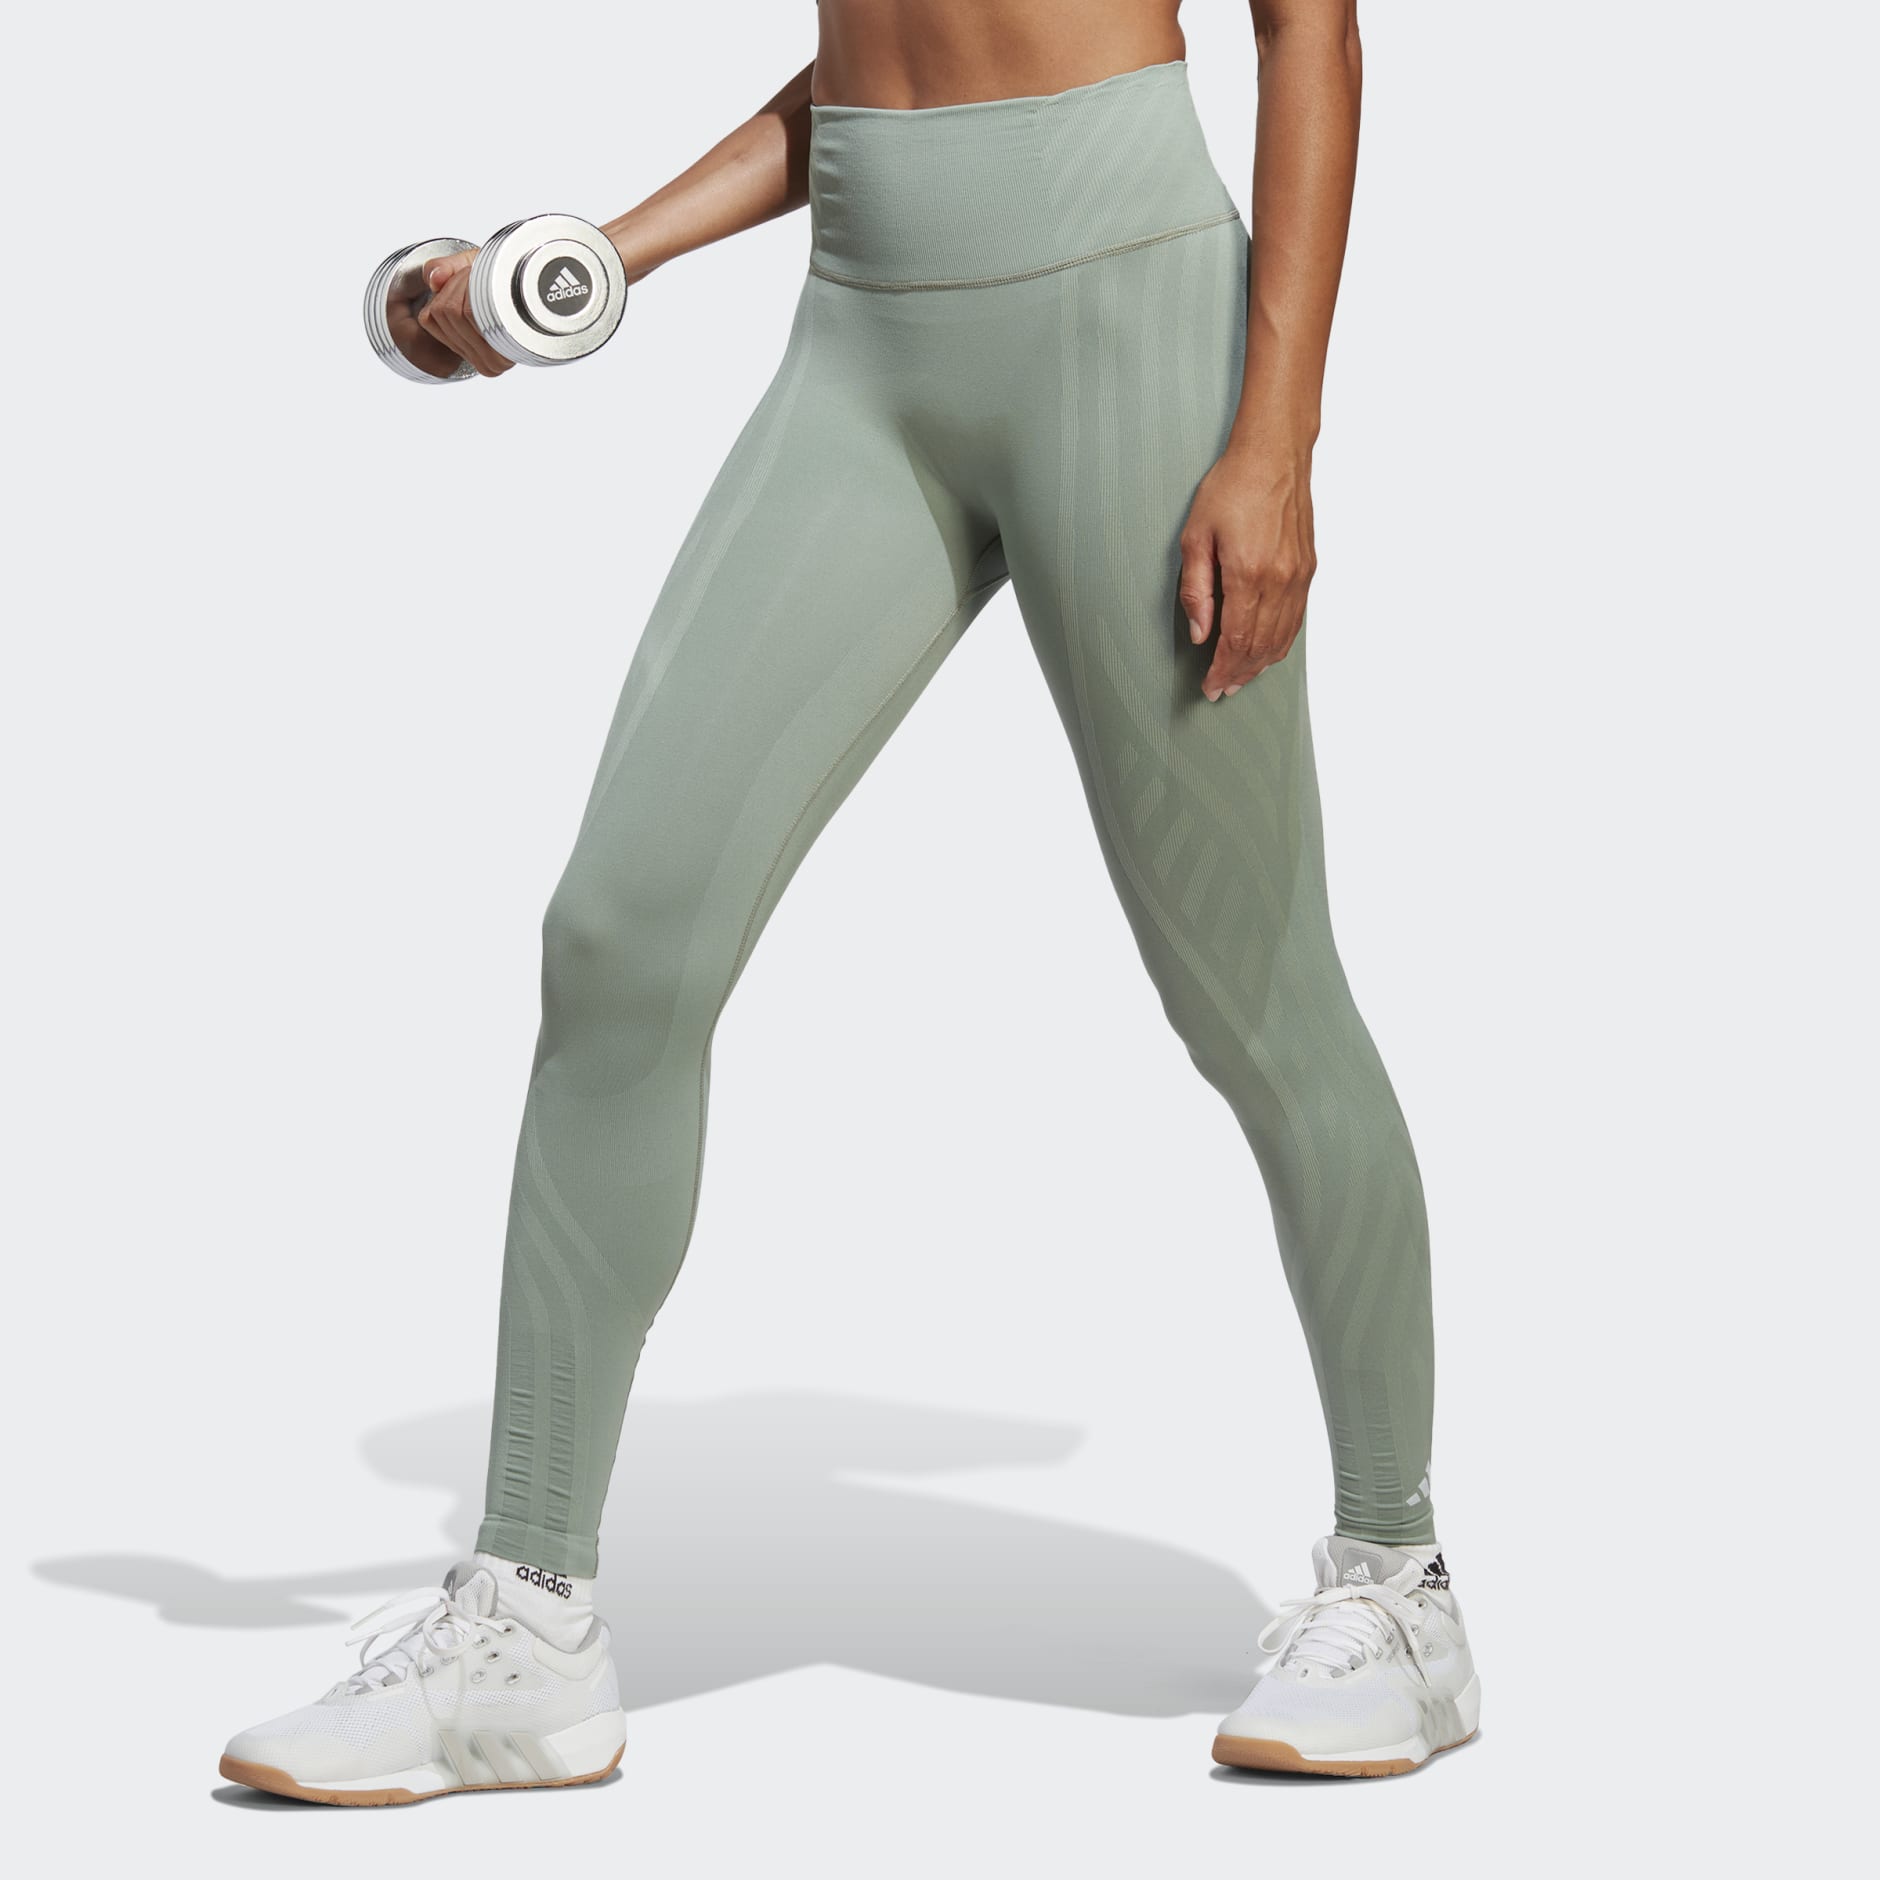 Clothing - FORMOTION Sculpted 7/8 Leggings - Green